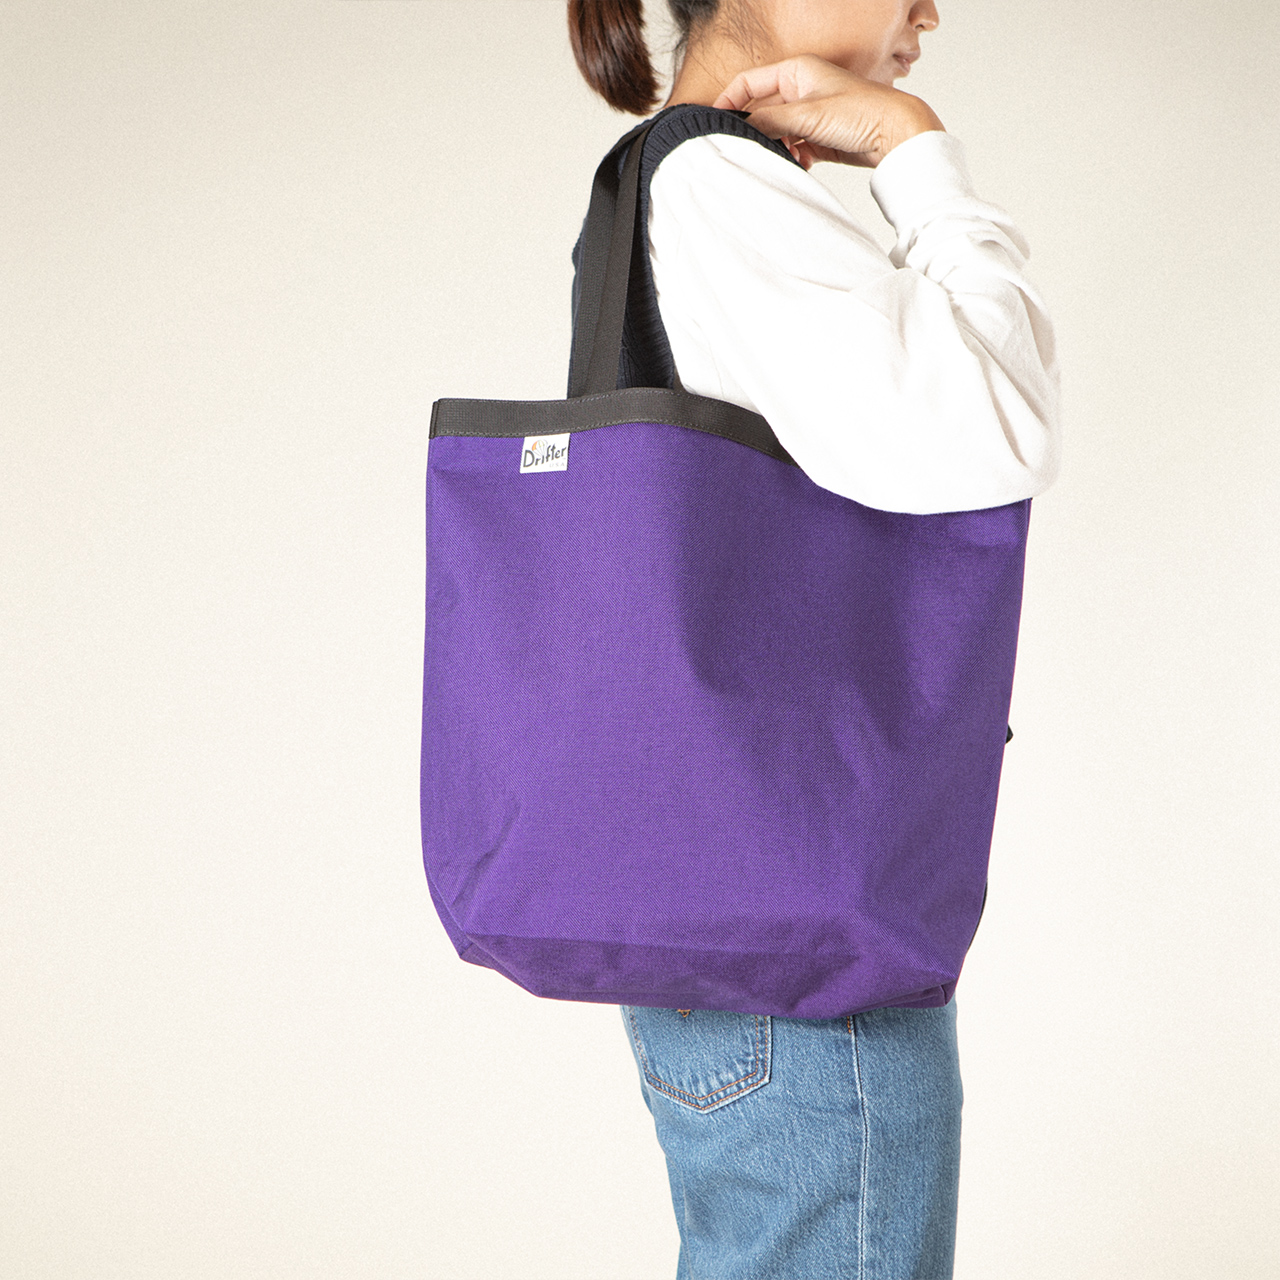 drifter-handle-tote